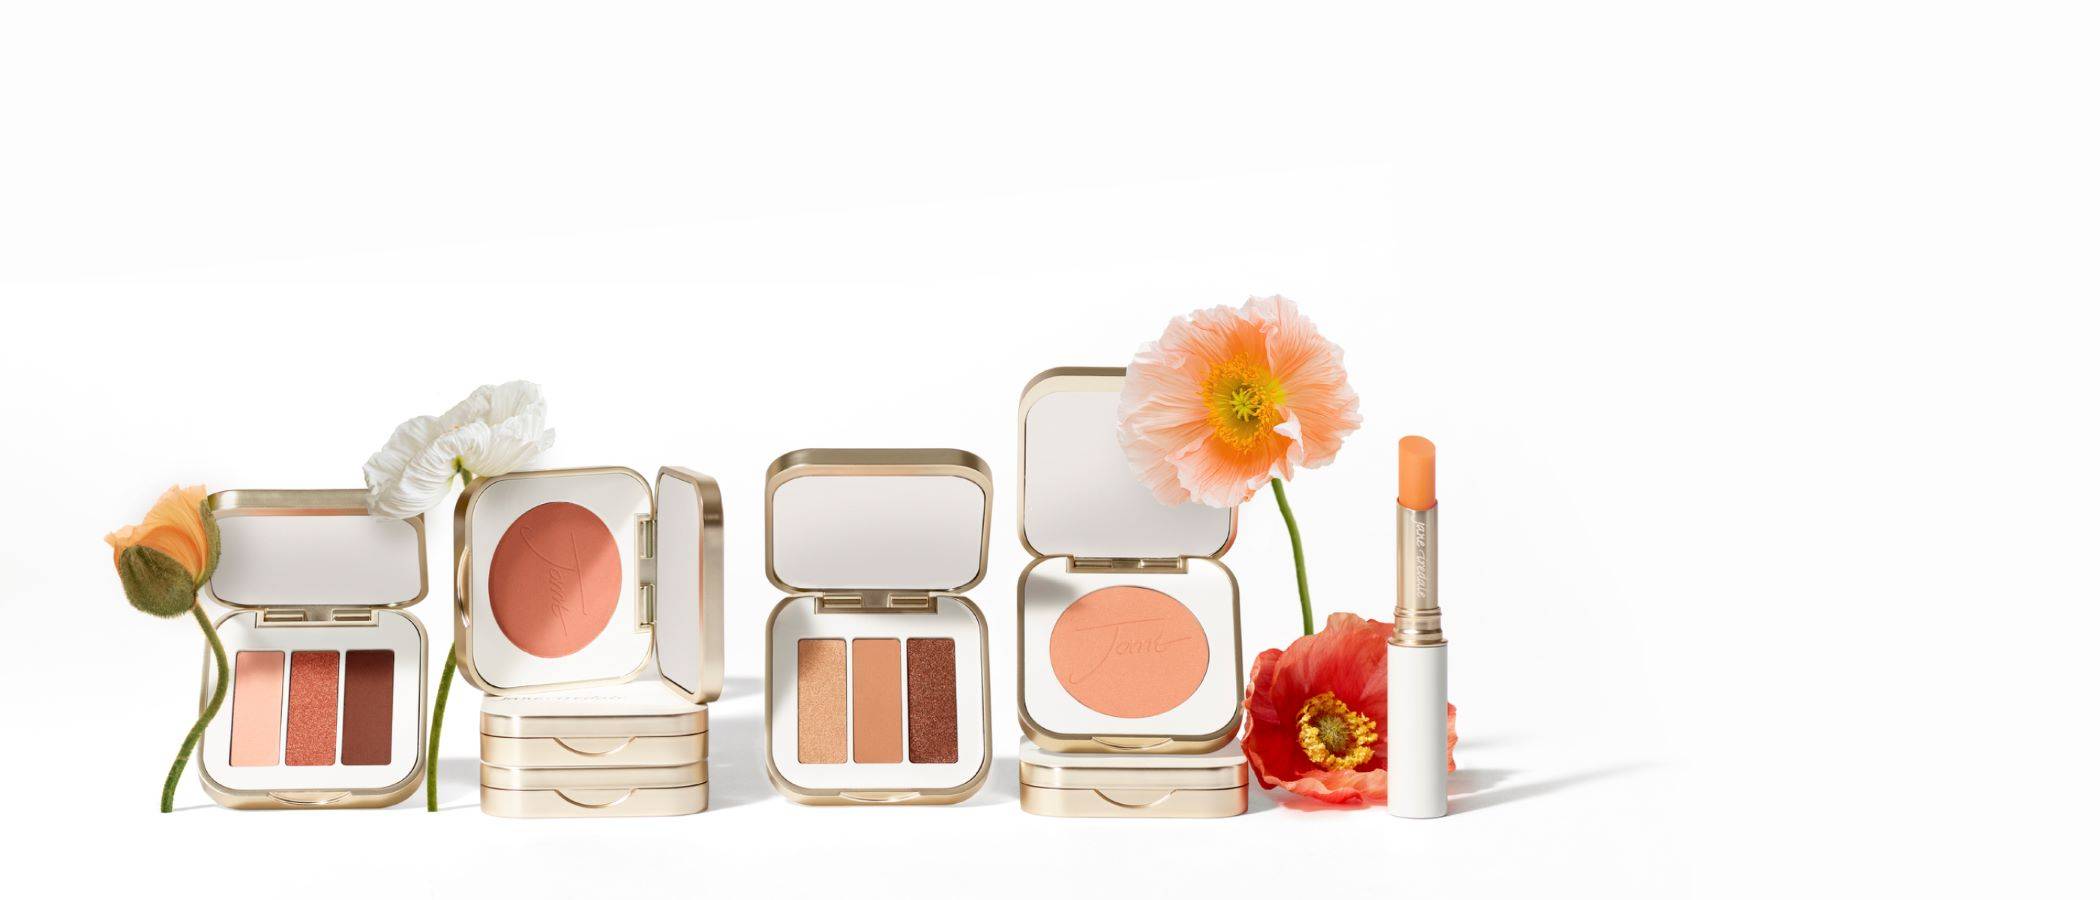 Several jane iredale products including eyeshadow, blush and a lip stain in shades of peach, coral, and copper are lined up with a few flowers against a white background.